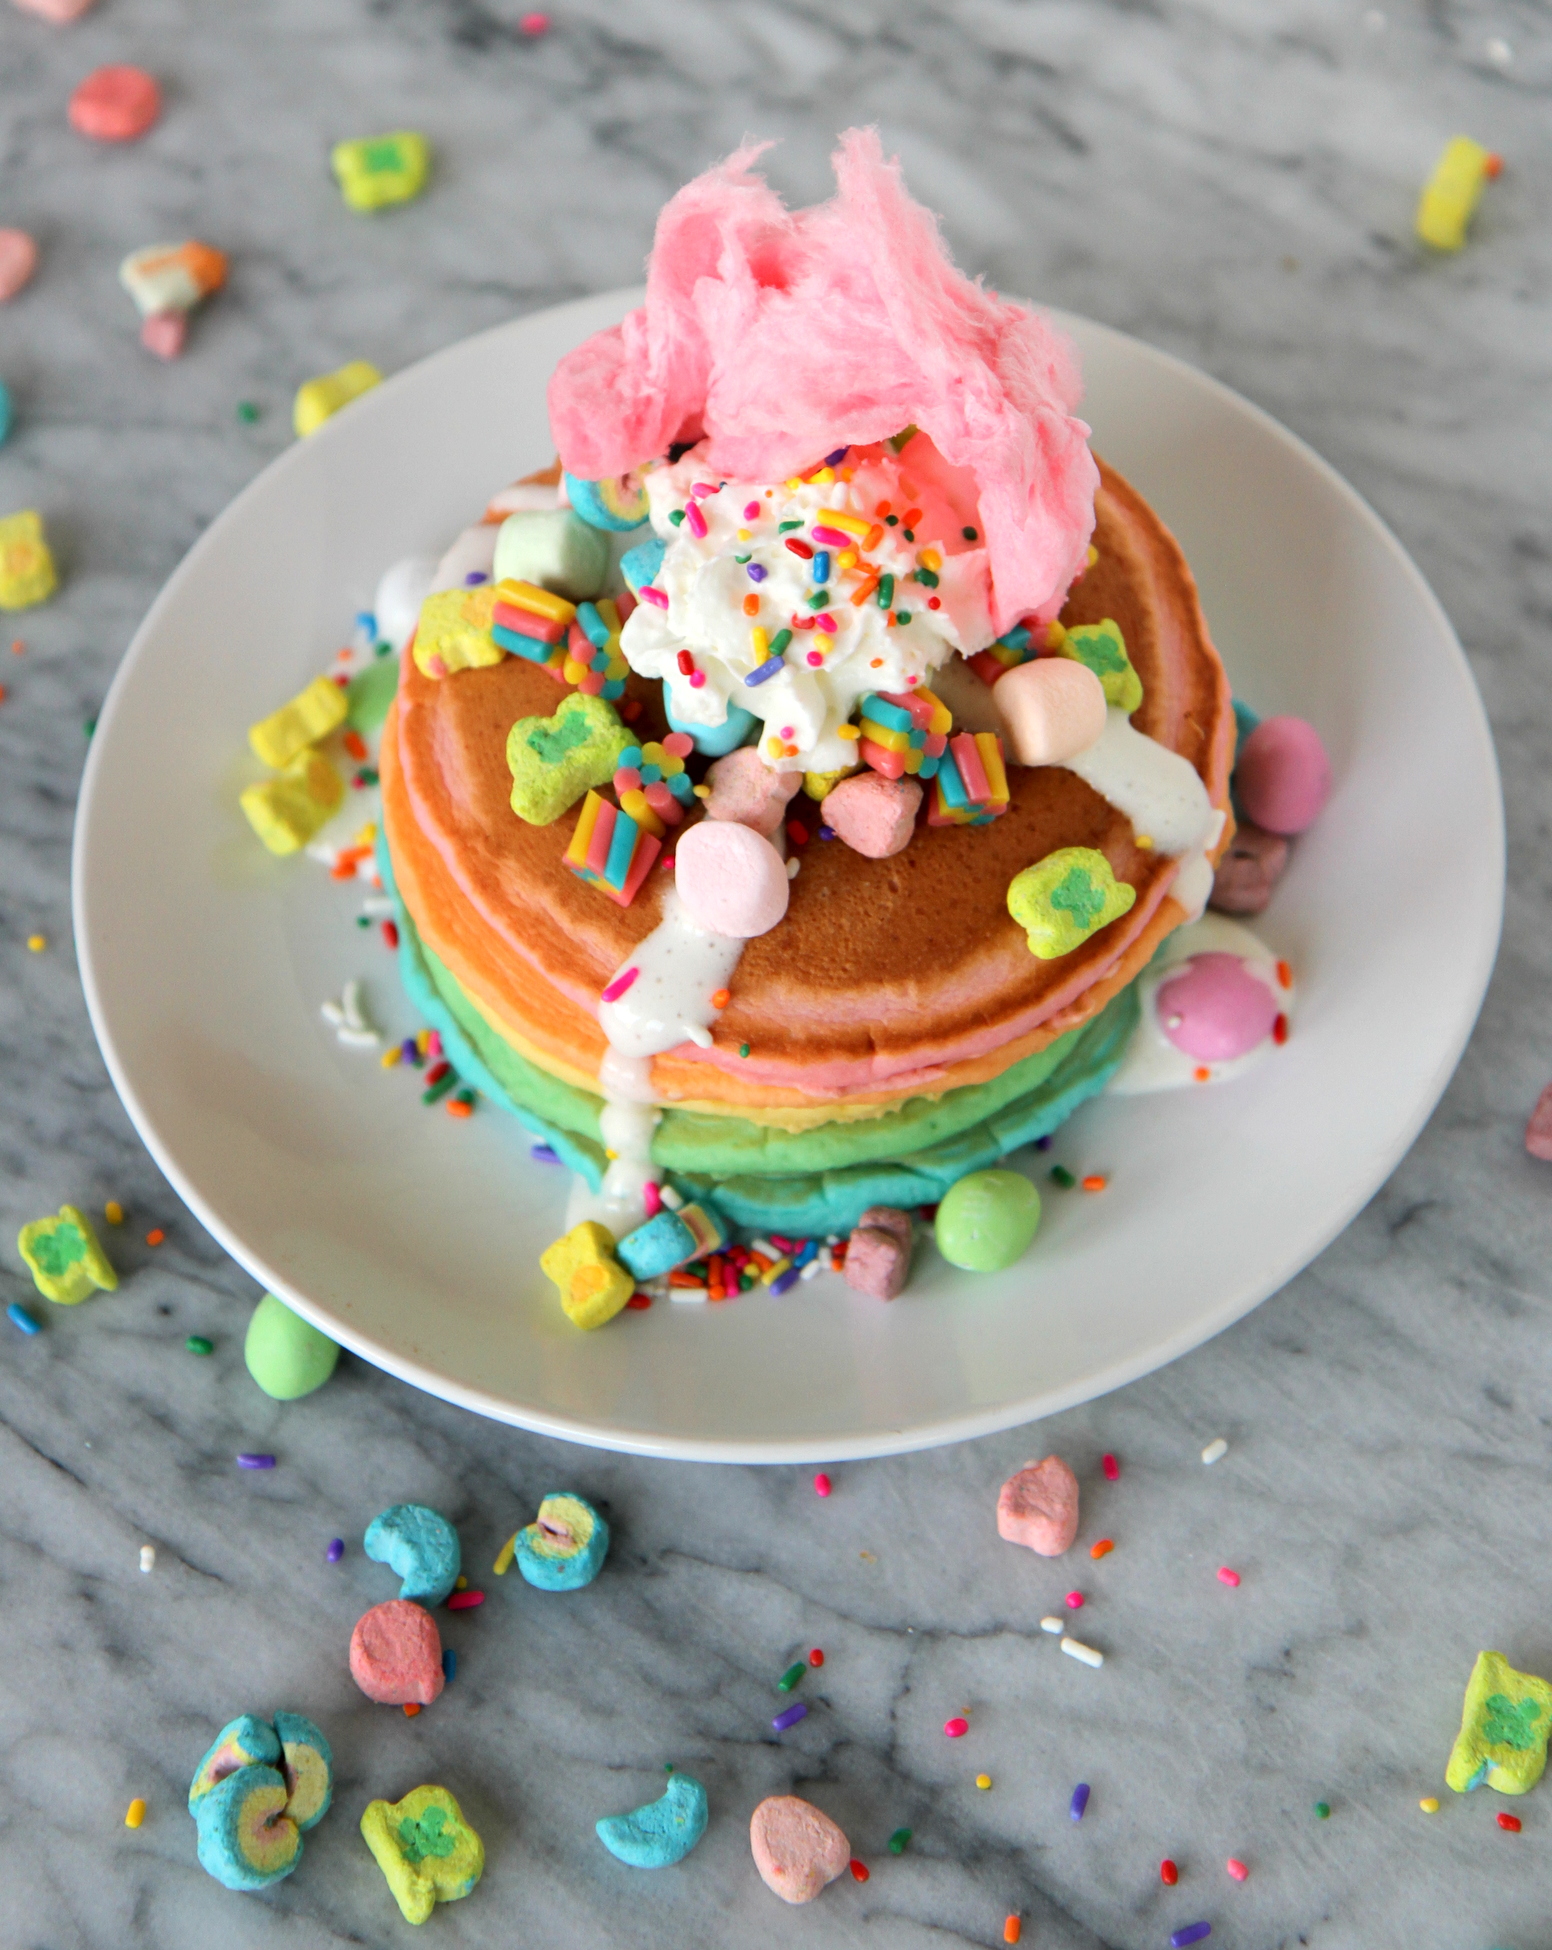 The perfect pancakes for a big (dessert) celebration (aka "crazy cakes")... a stack of rainbow pancakes with a pile of wild toppings!